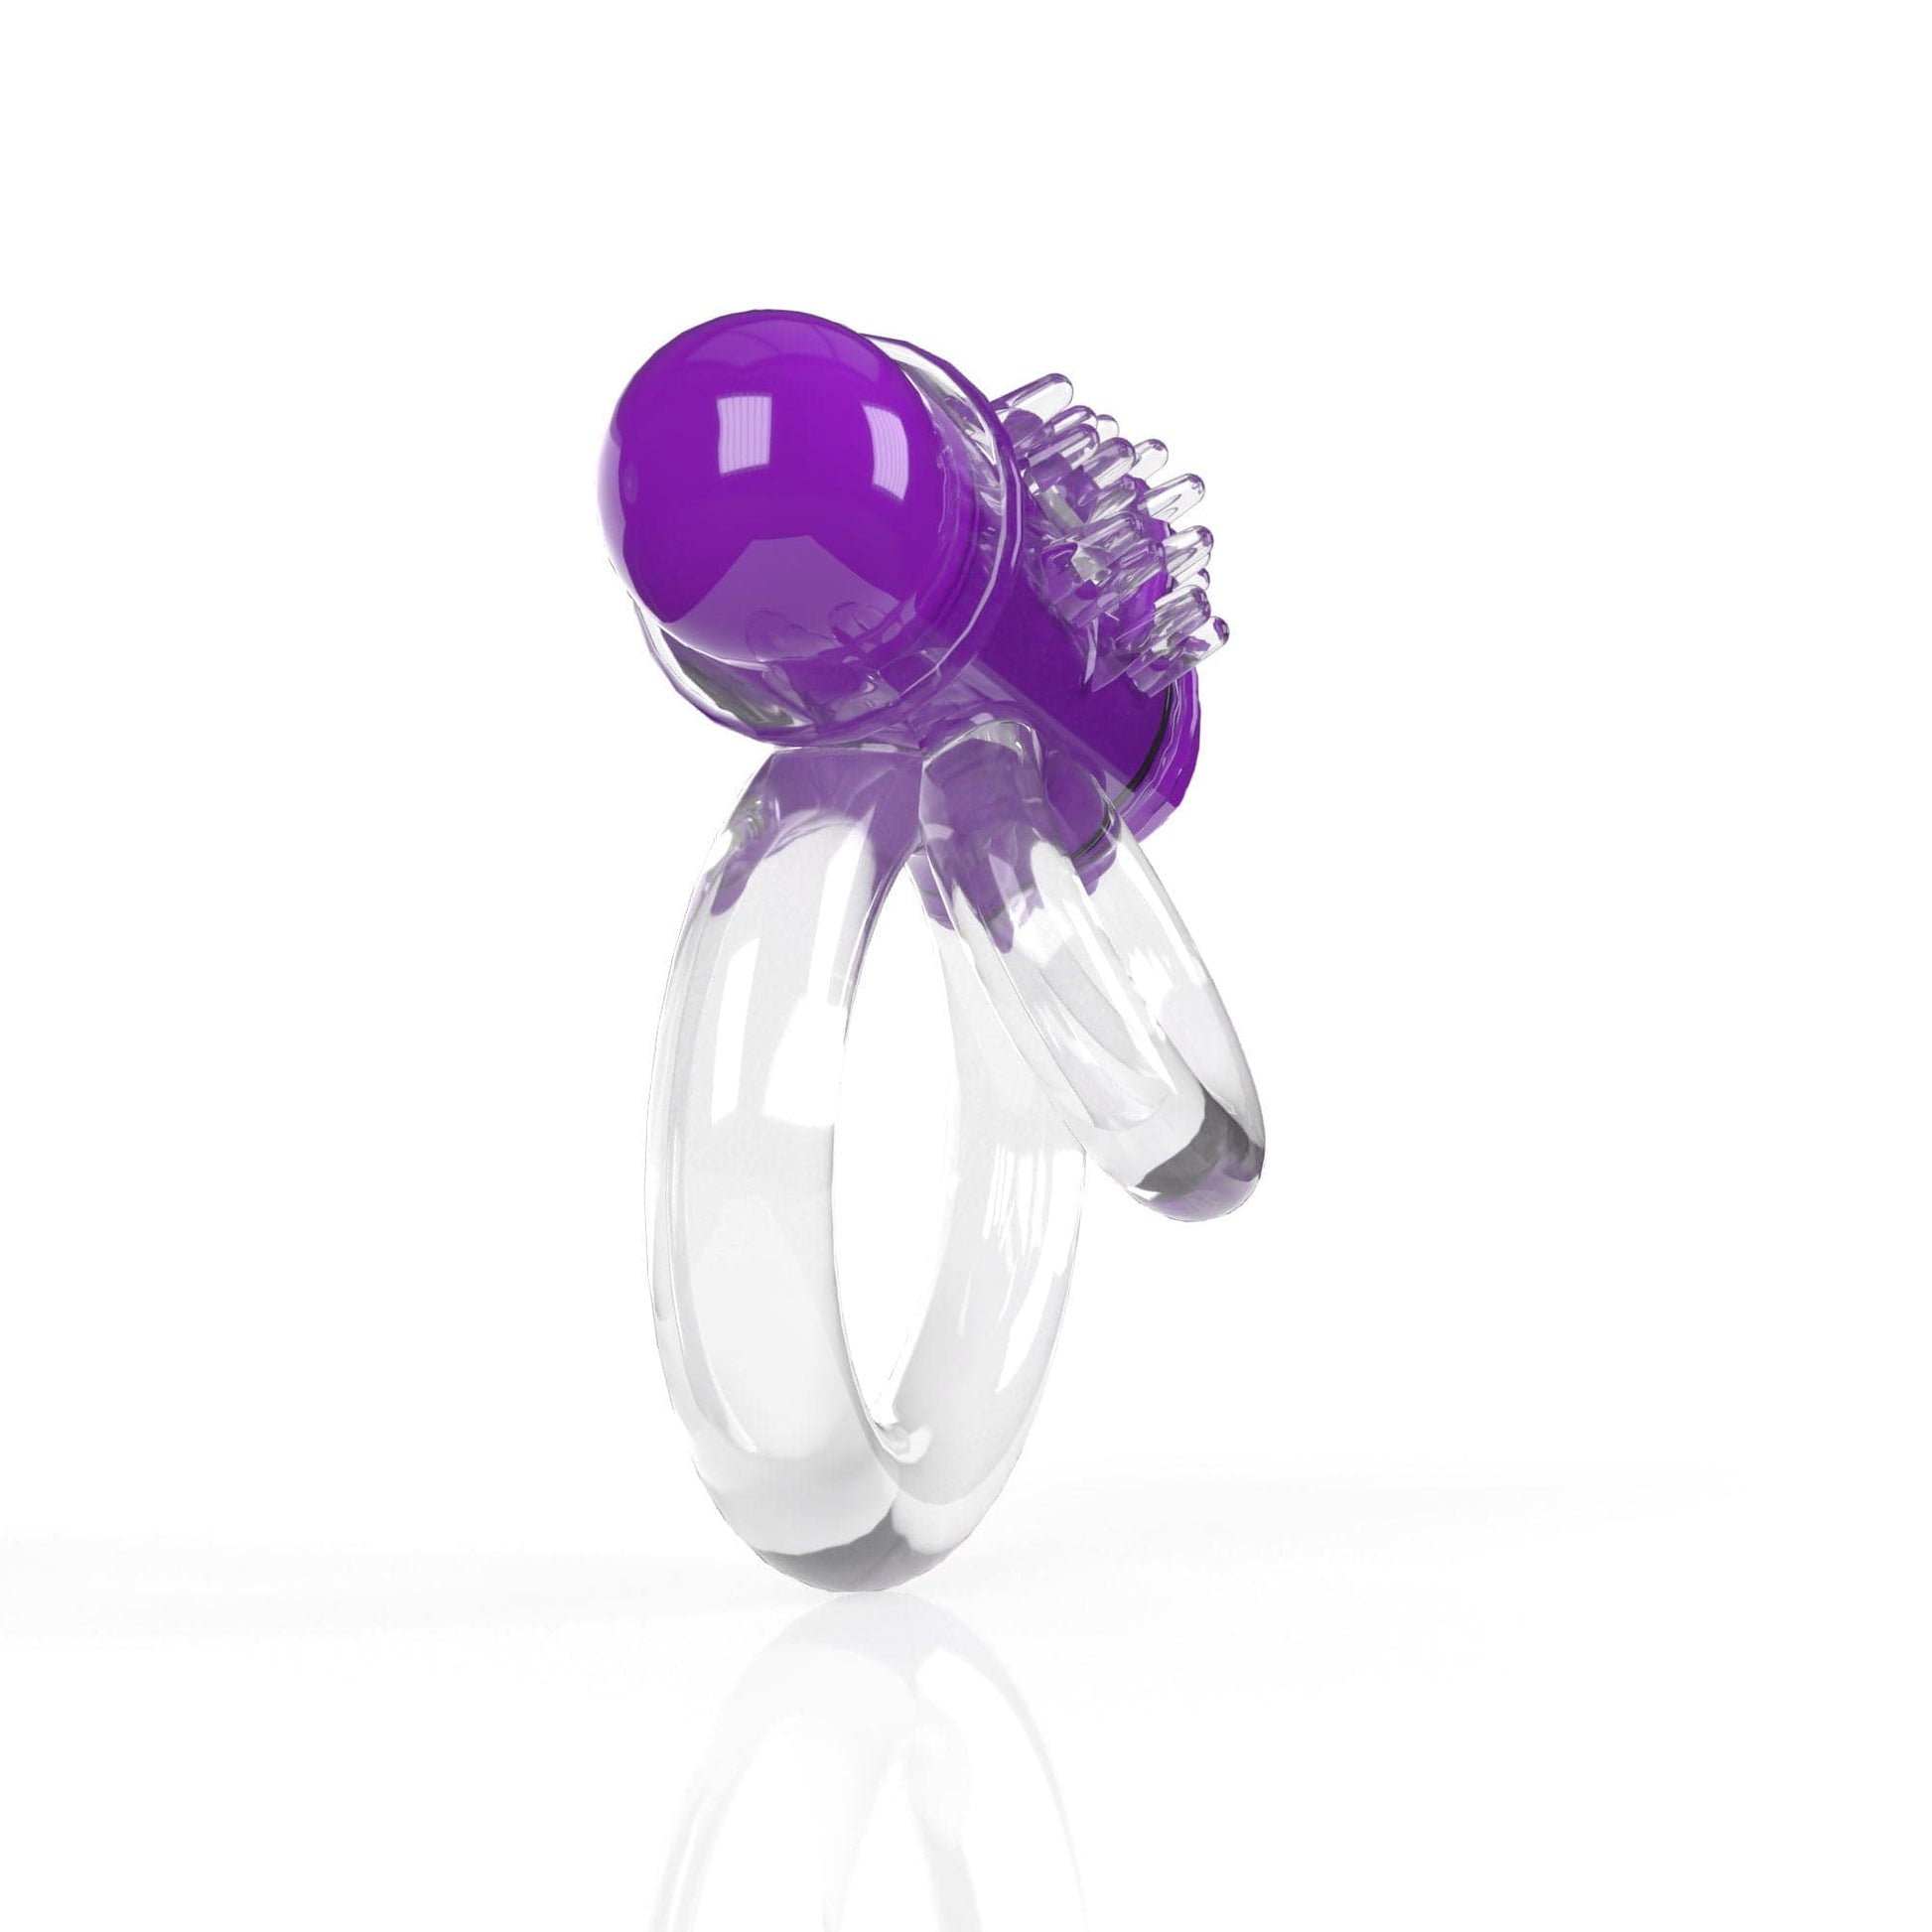 screaming o 4t double o 6 super powered vibrating double ring grape